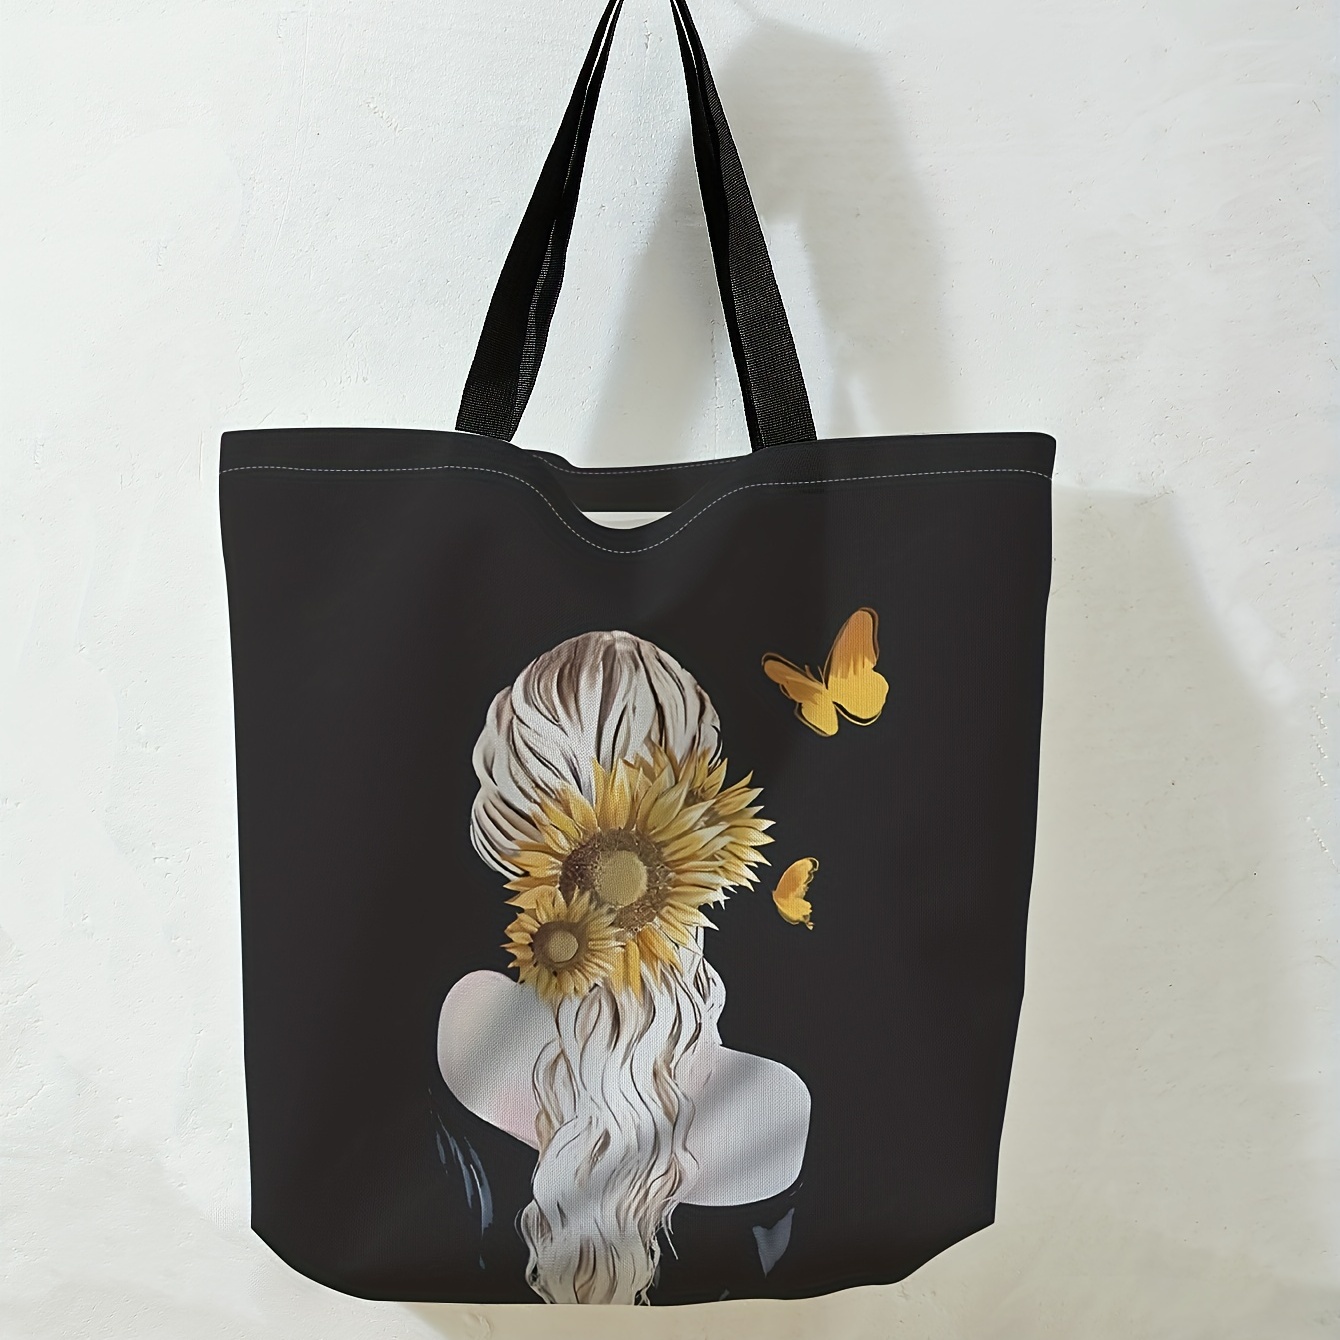 Butterfly Tote Bag, Beach, Travel, Large Canvas Shopping, Grocery